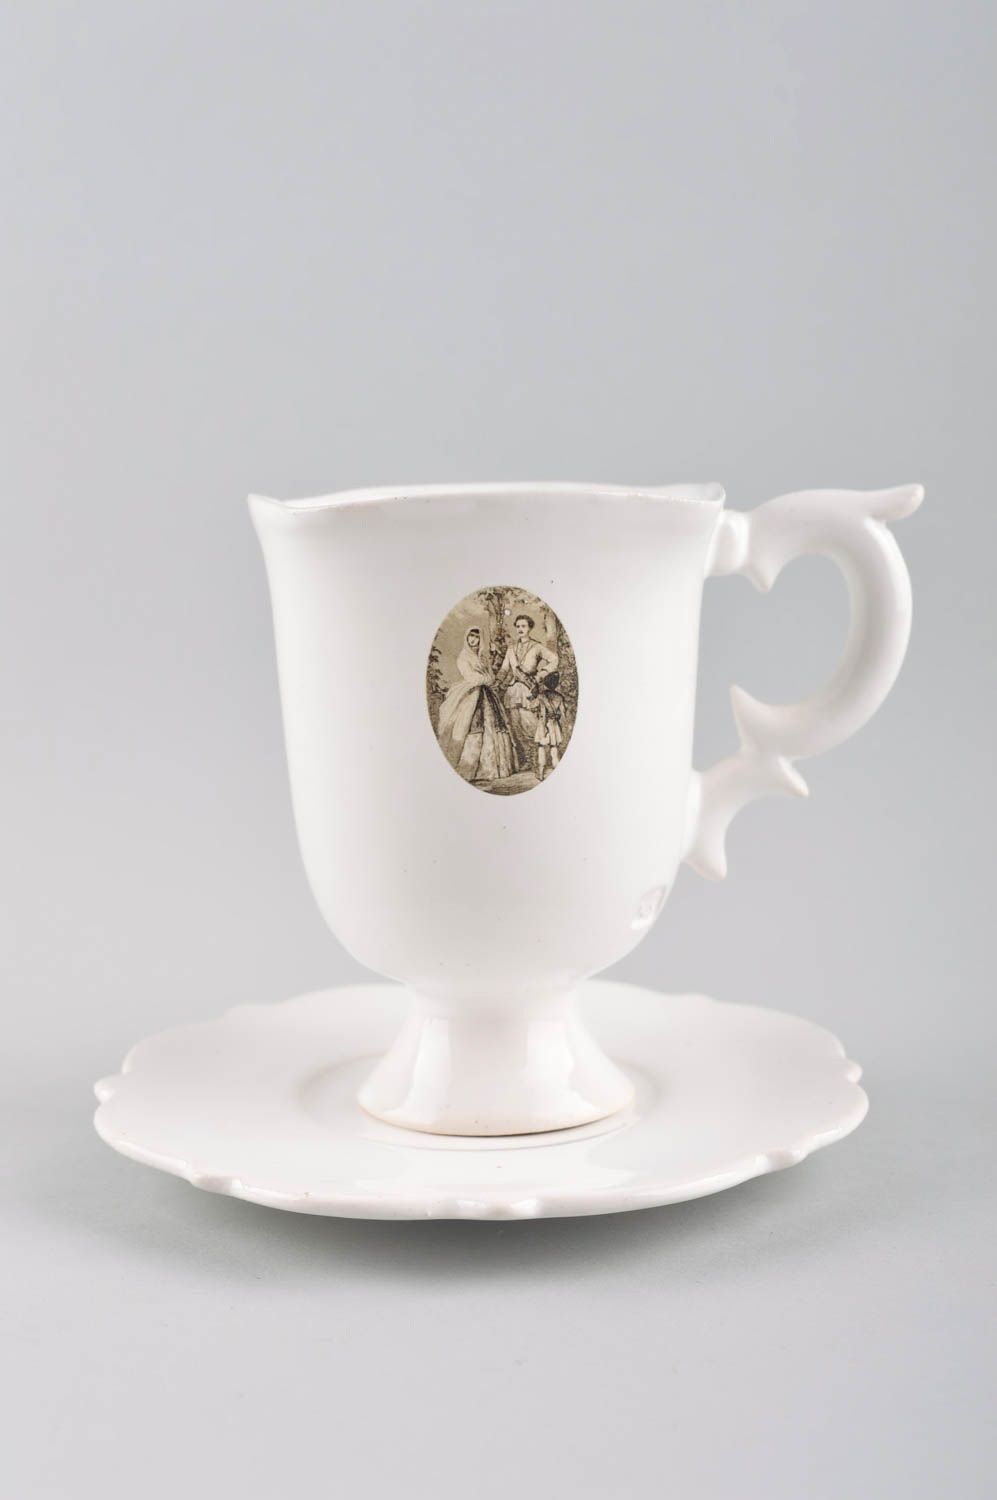 8 oz elegant white ceramic porcelain teacup with a handle on stand with saucer 0,82 lb photo 2